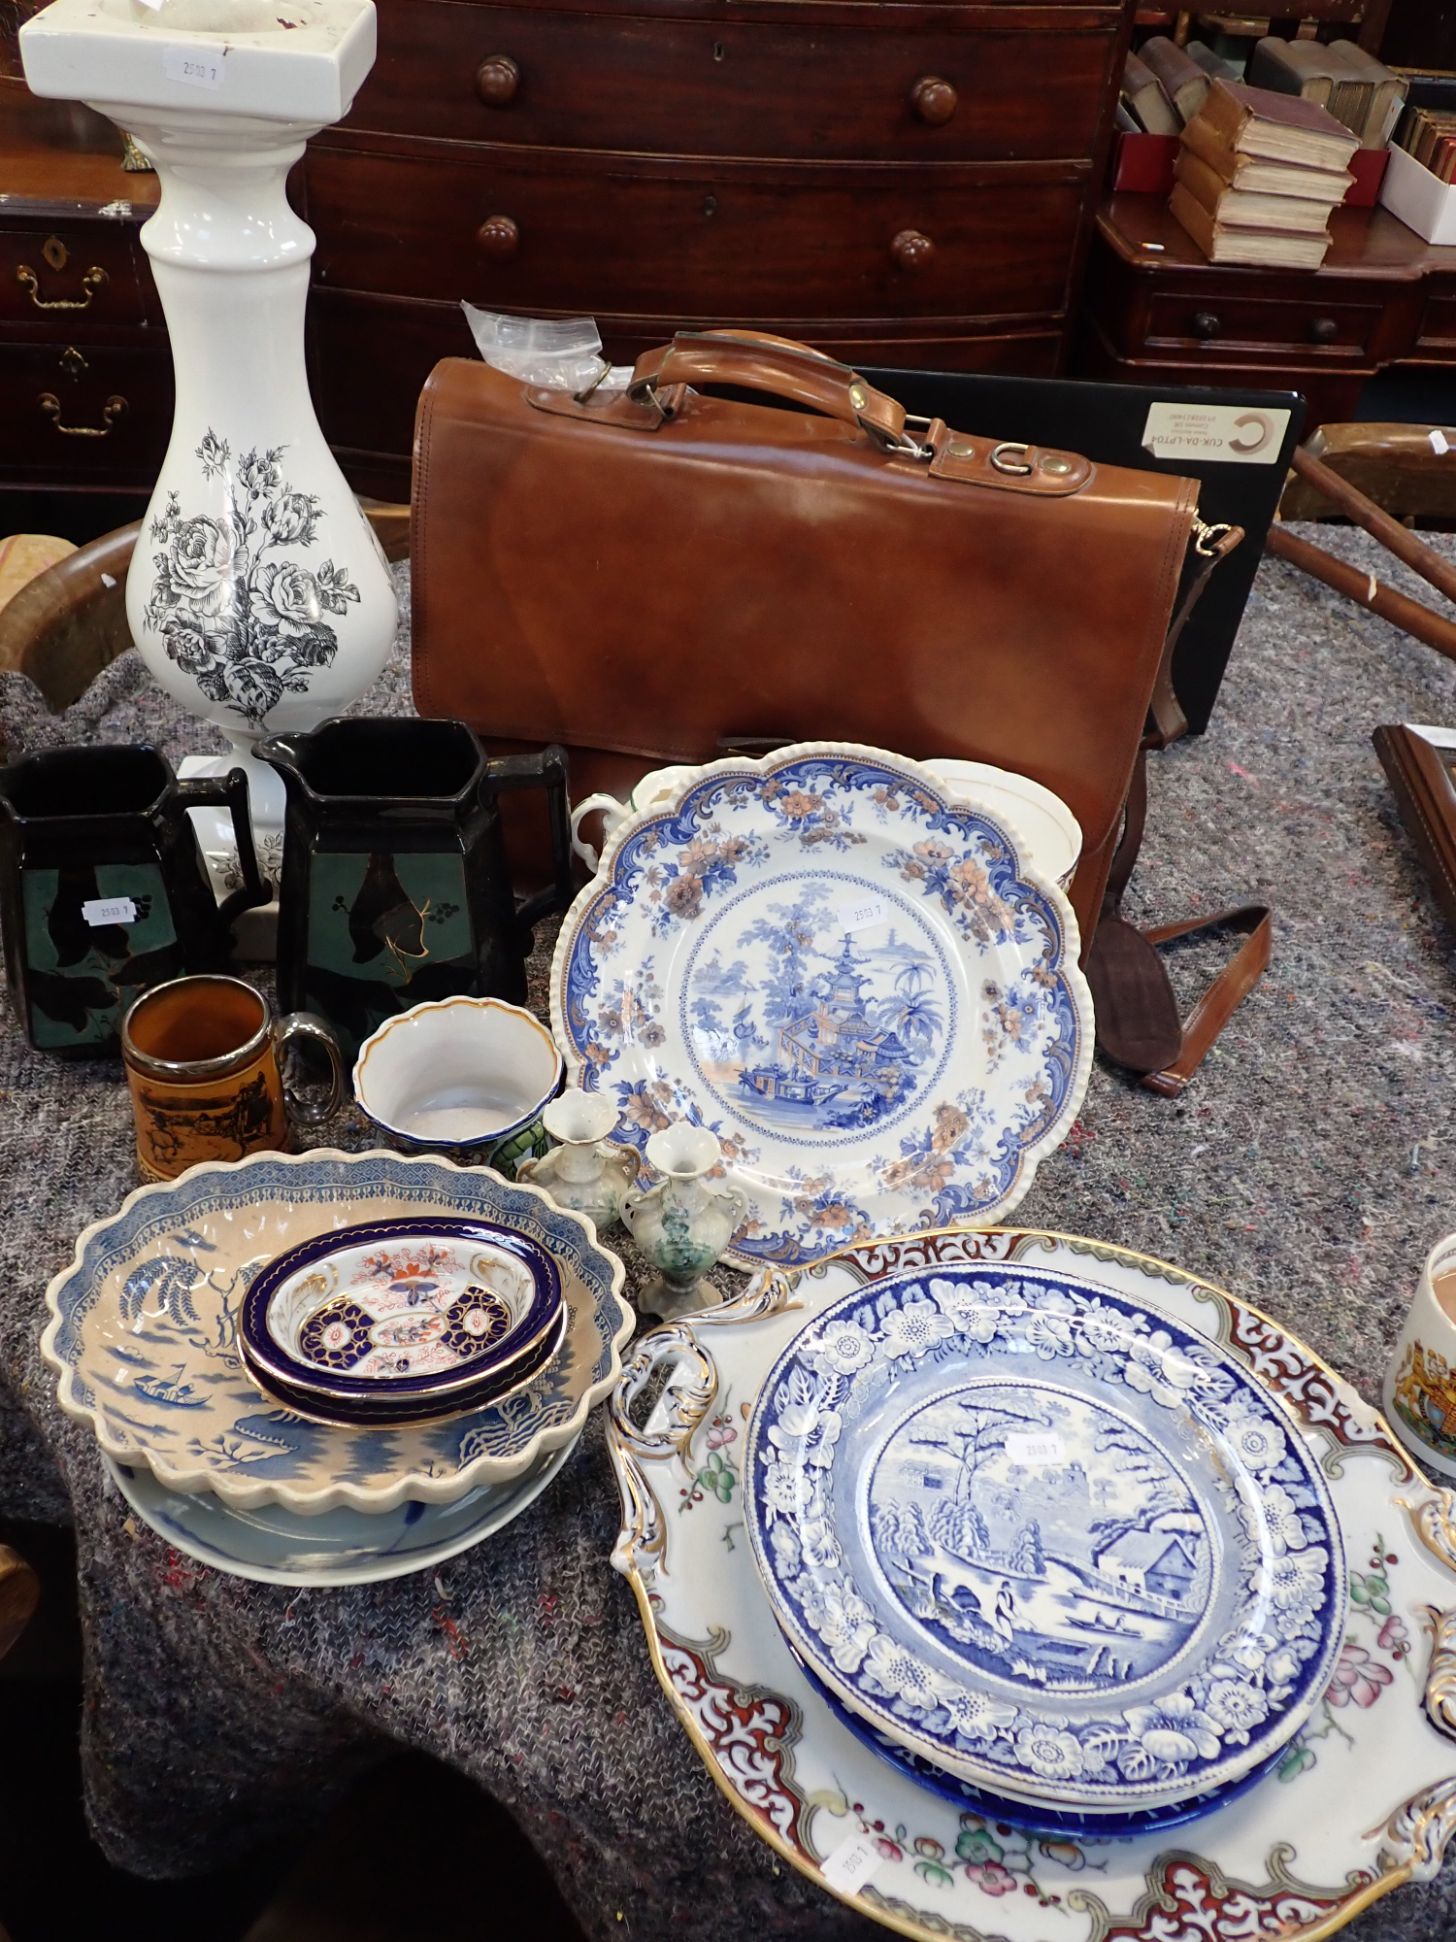 TWO EARLY VICTORIAN BLUE AND WHITE PLATES